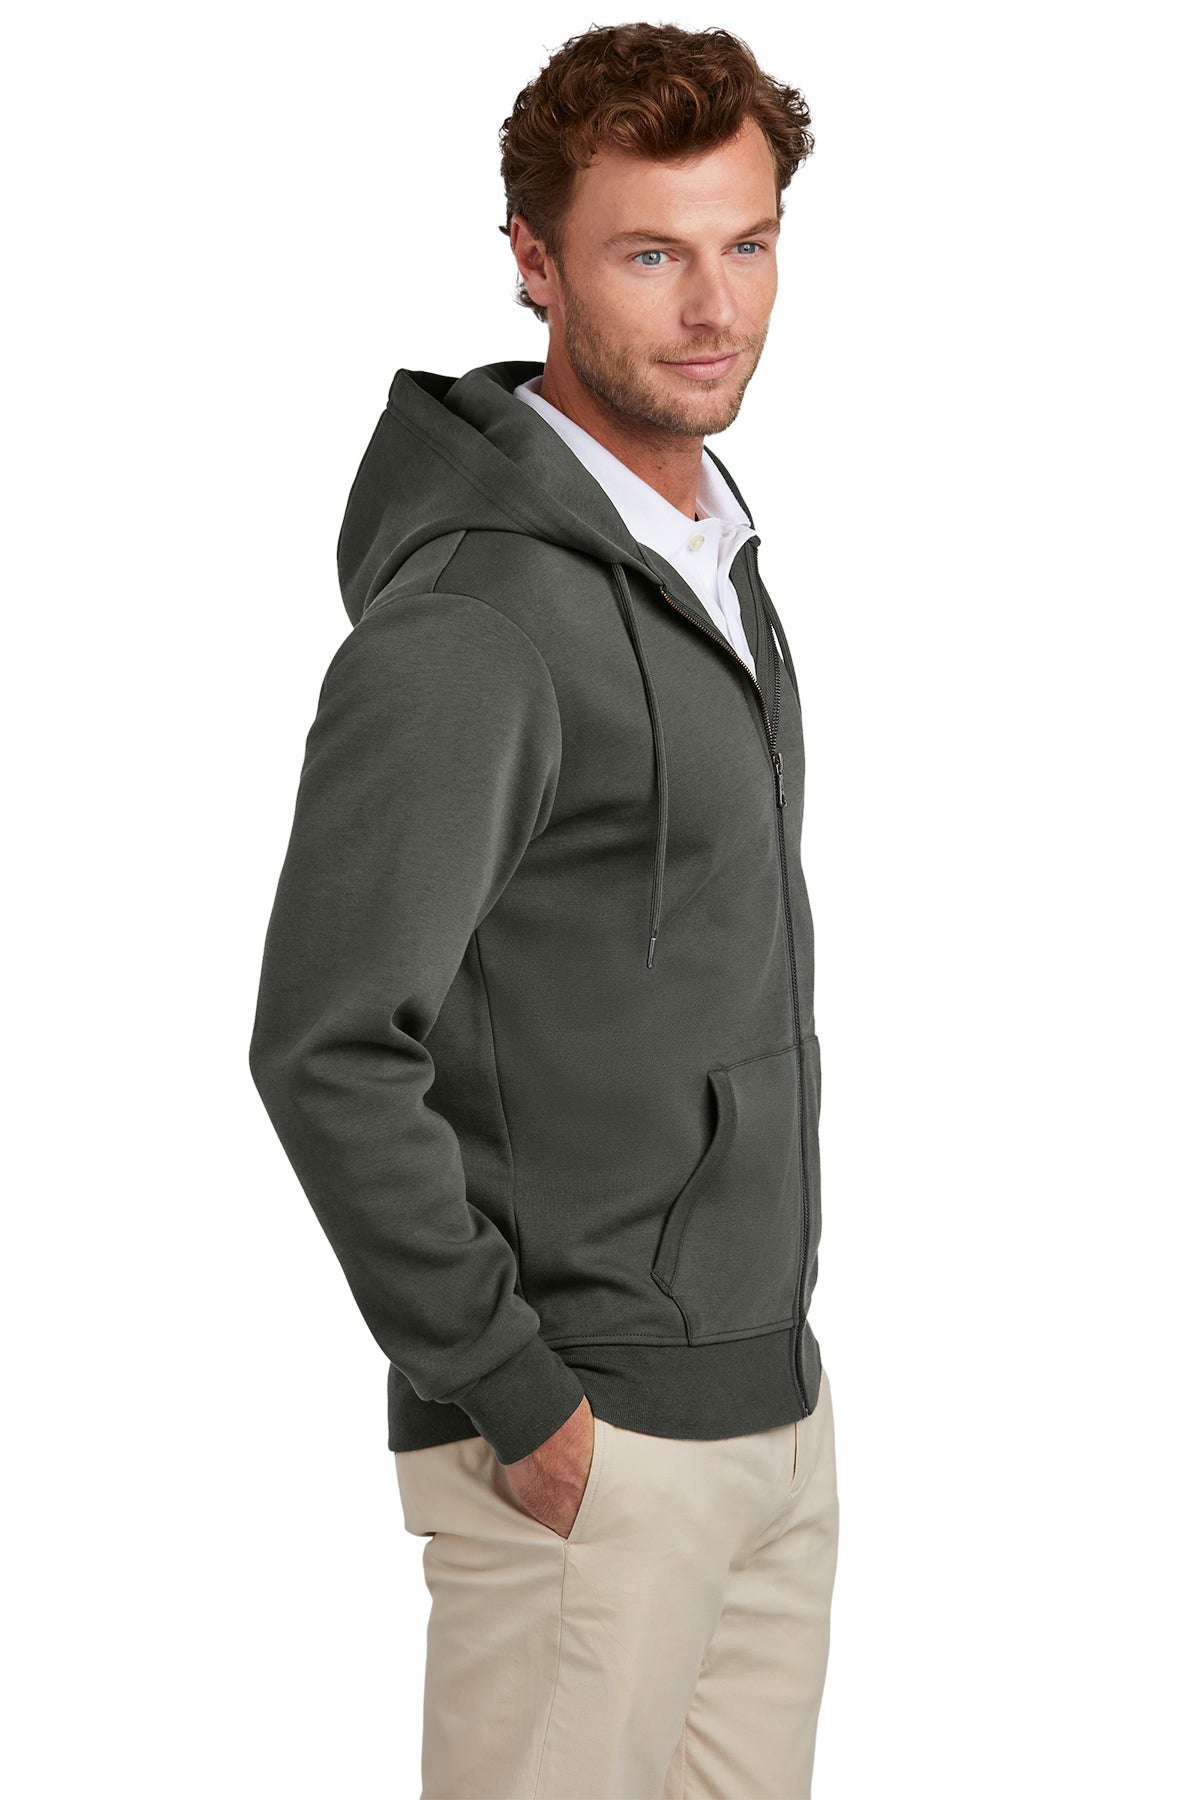 Brooks Brothers Double-Knit Full-Zip Hoodie, Windsor Grey